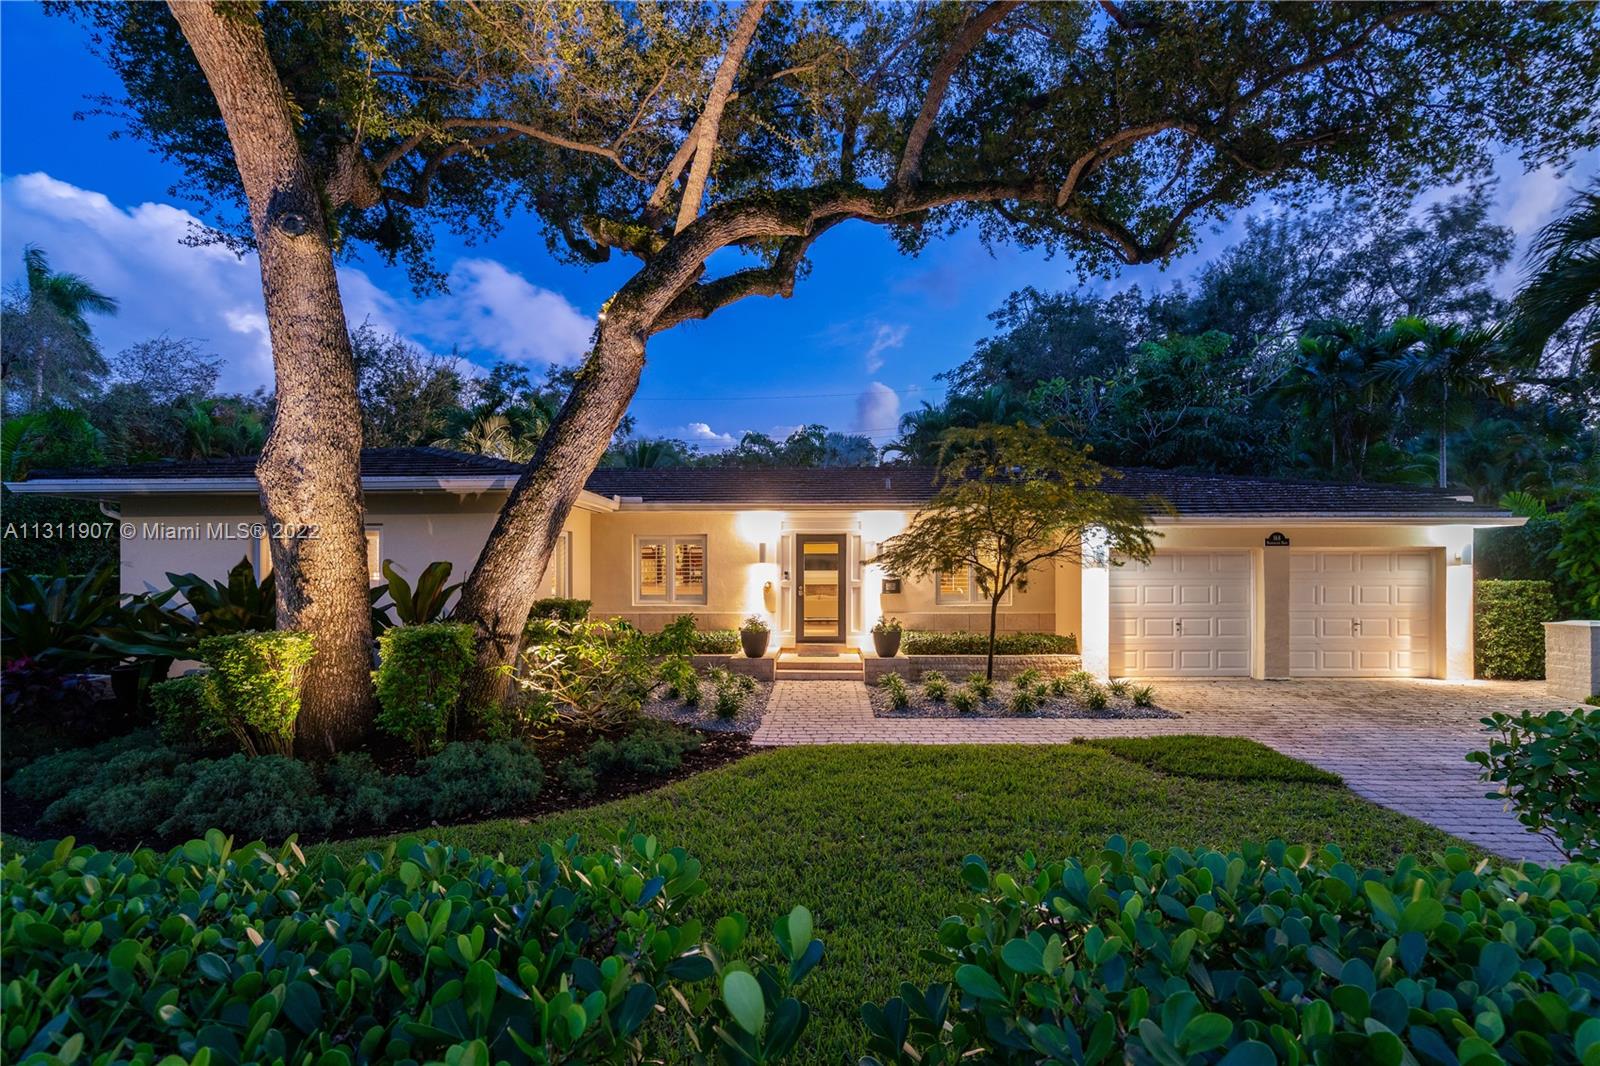 This idyllic Coral Gables home is a jewel. Quality, high-end finishes are evident throughout this 2000 sf home. Gorgeous wood floors and moldings enhance the vaulted ceilings and generously sized rooms. The beautiful great room is where you will want to spend all your time. An Italian-designer kitchen offers excellent storage as well as a gas stove, pot filler & wine cooler. The wood-burning fireplace, designer walk-in closets, & plantation shutters add additional charm and refinement. The bonus room is a perfect spot for a home office. A summer kitchen and BBQ and outdoor patio will be used year-round for entertaining.  This home is in a prestigious Coral Gables pocket, sitting high on the ridge in a no flood zone. Two car garage with lots of storage.  A Very Special Home.